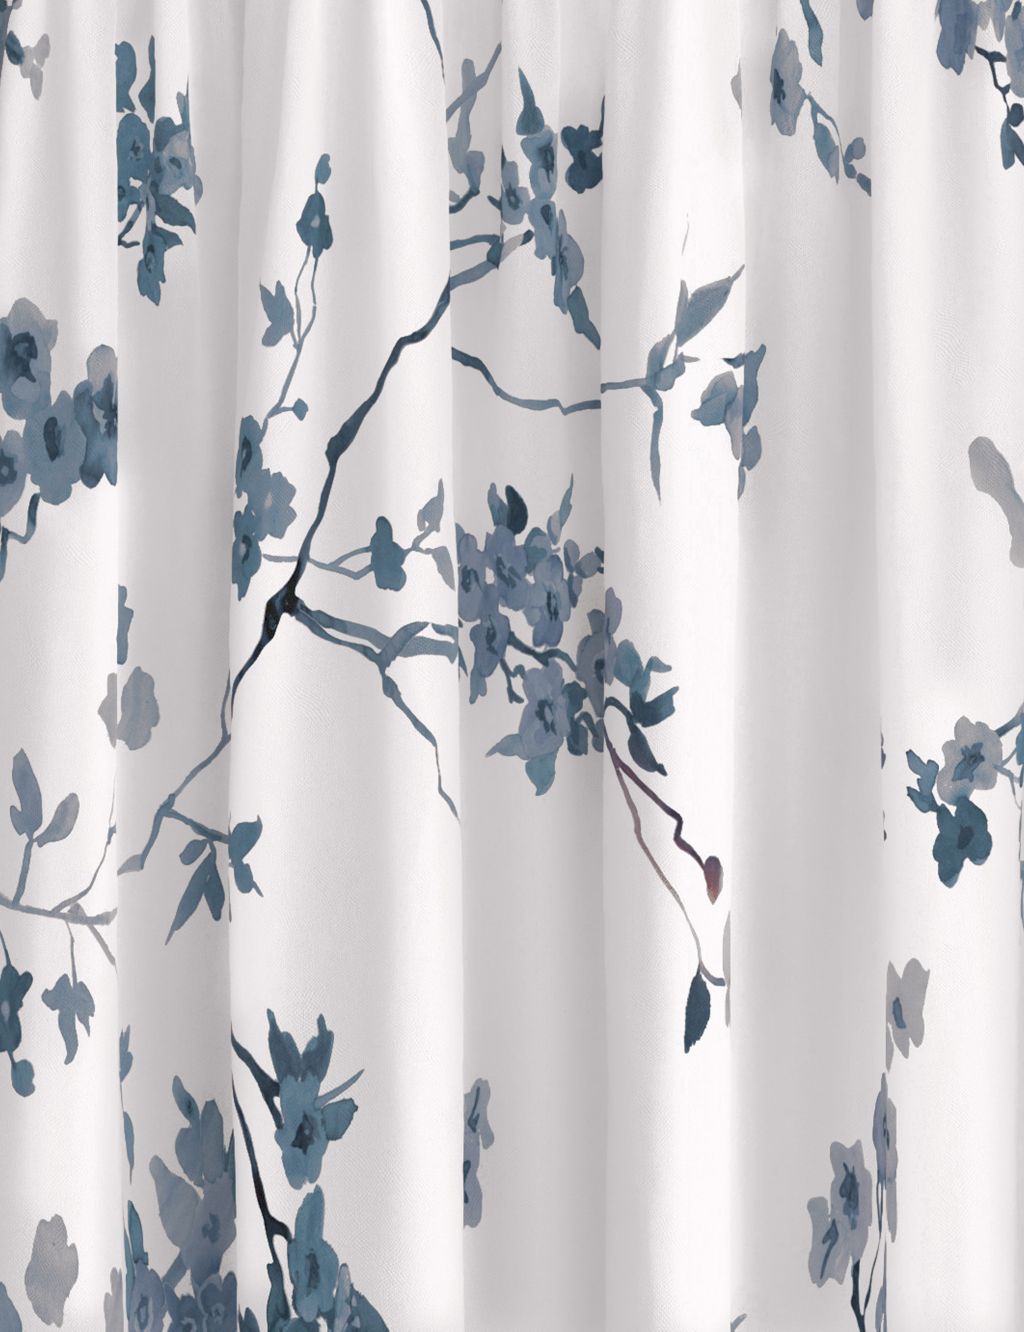 Sateen Cherry Blossom Pencil Pleat Blackout Curtains image 2